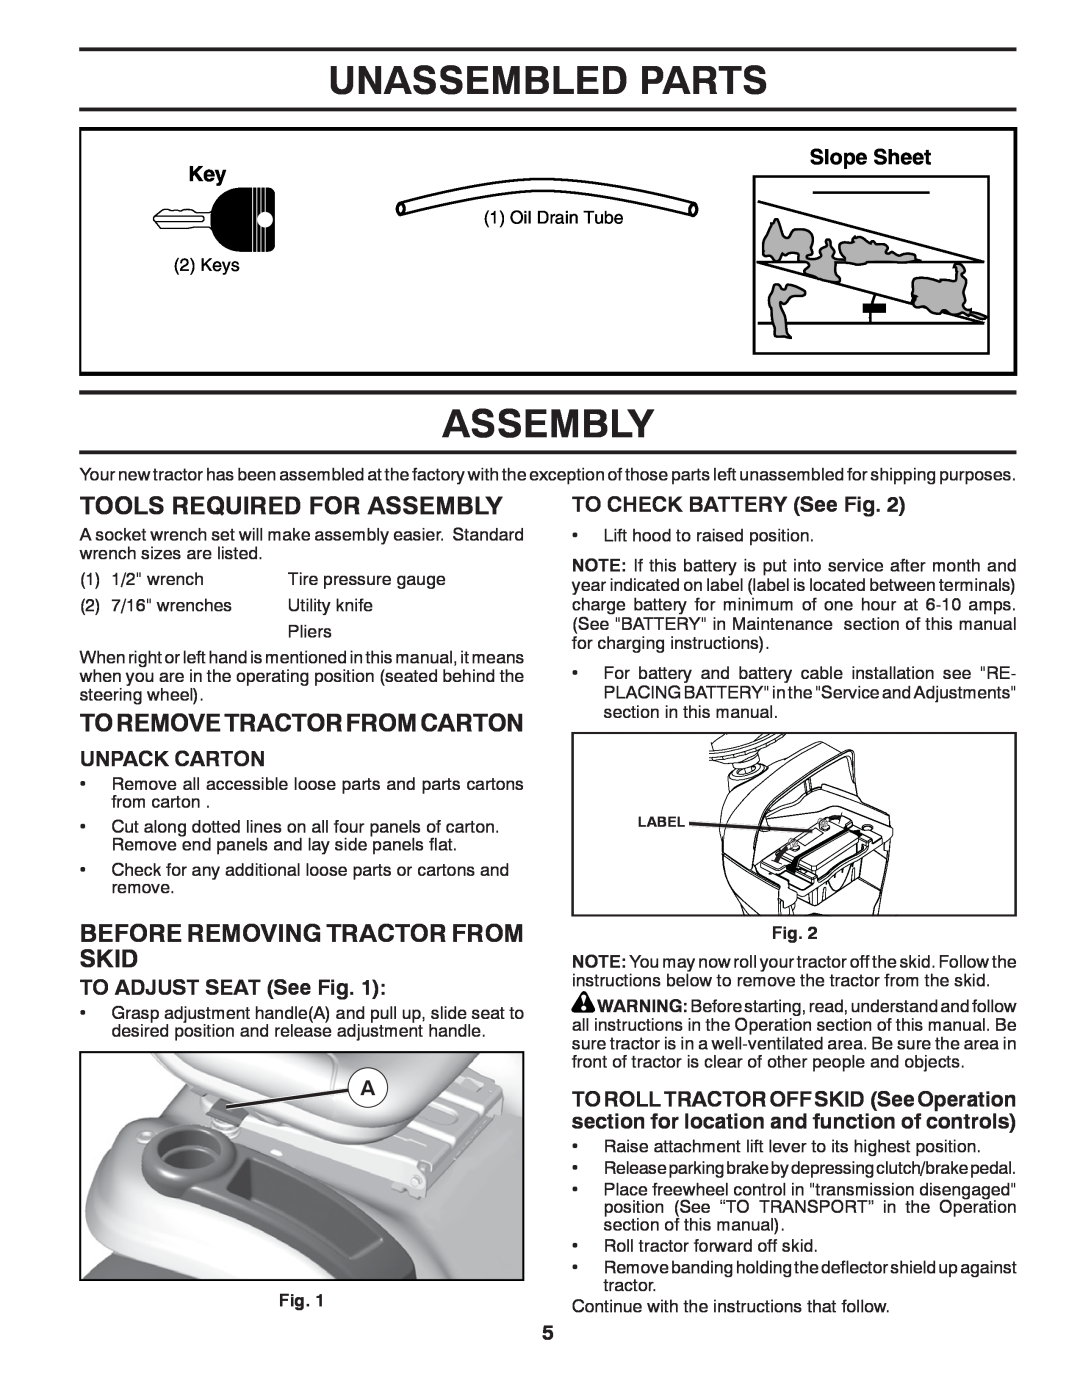 Poulan 433413 manual Unassembled Parts, Tools Required For Assembly, To Remove Tractor From Carton, Slope Sheet Key 